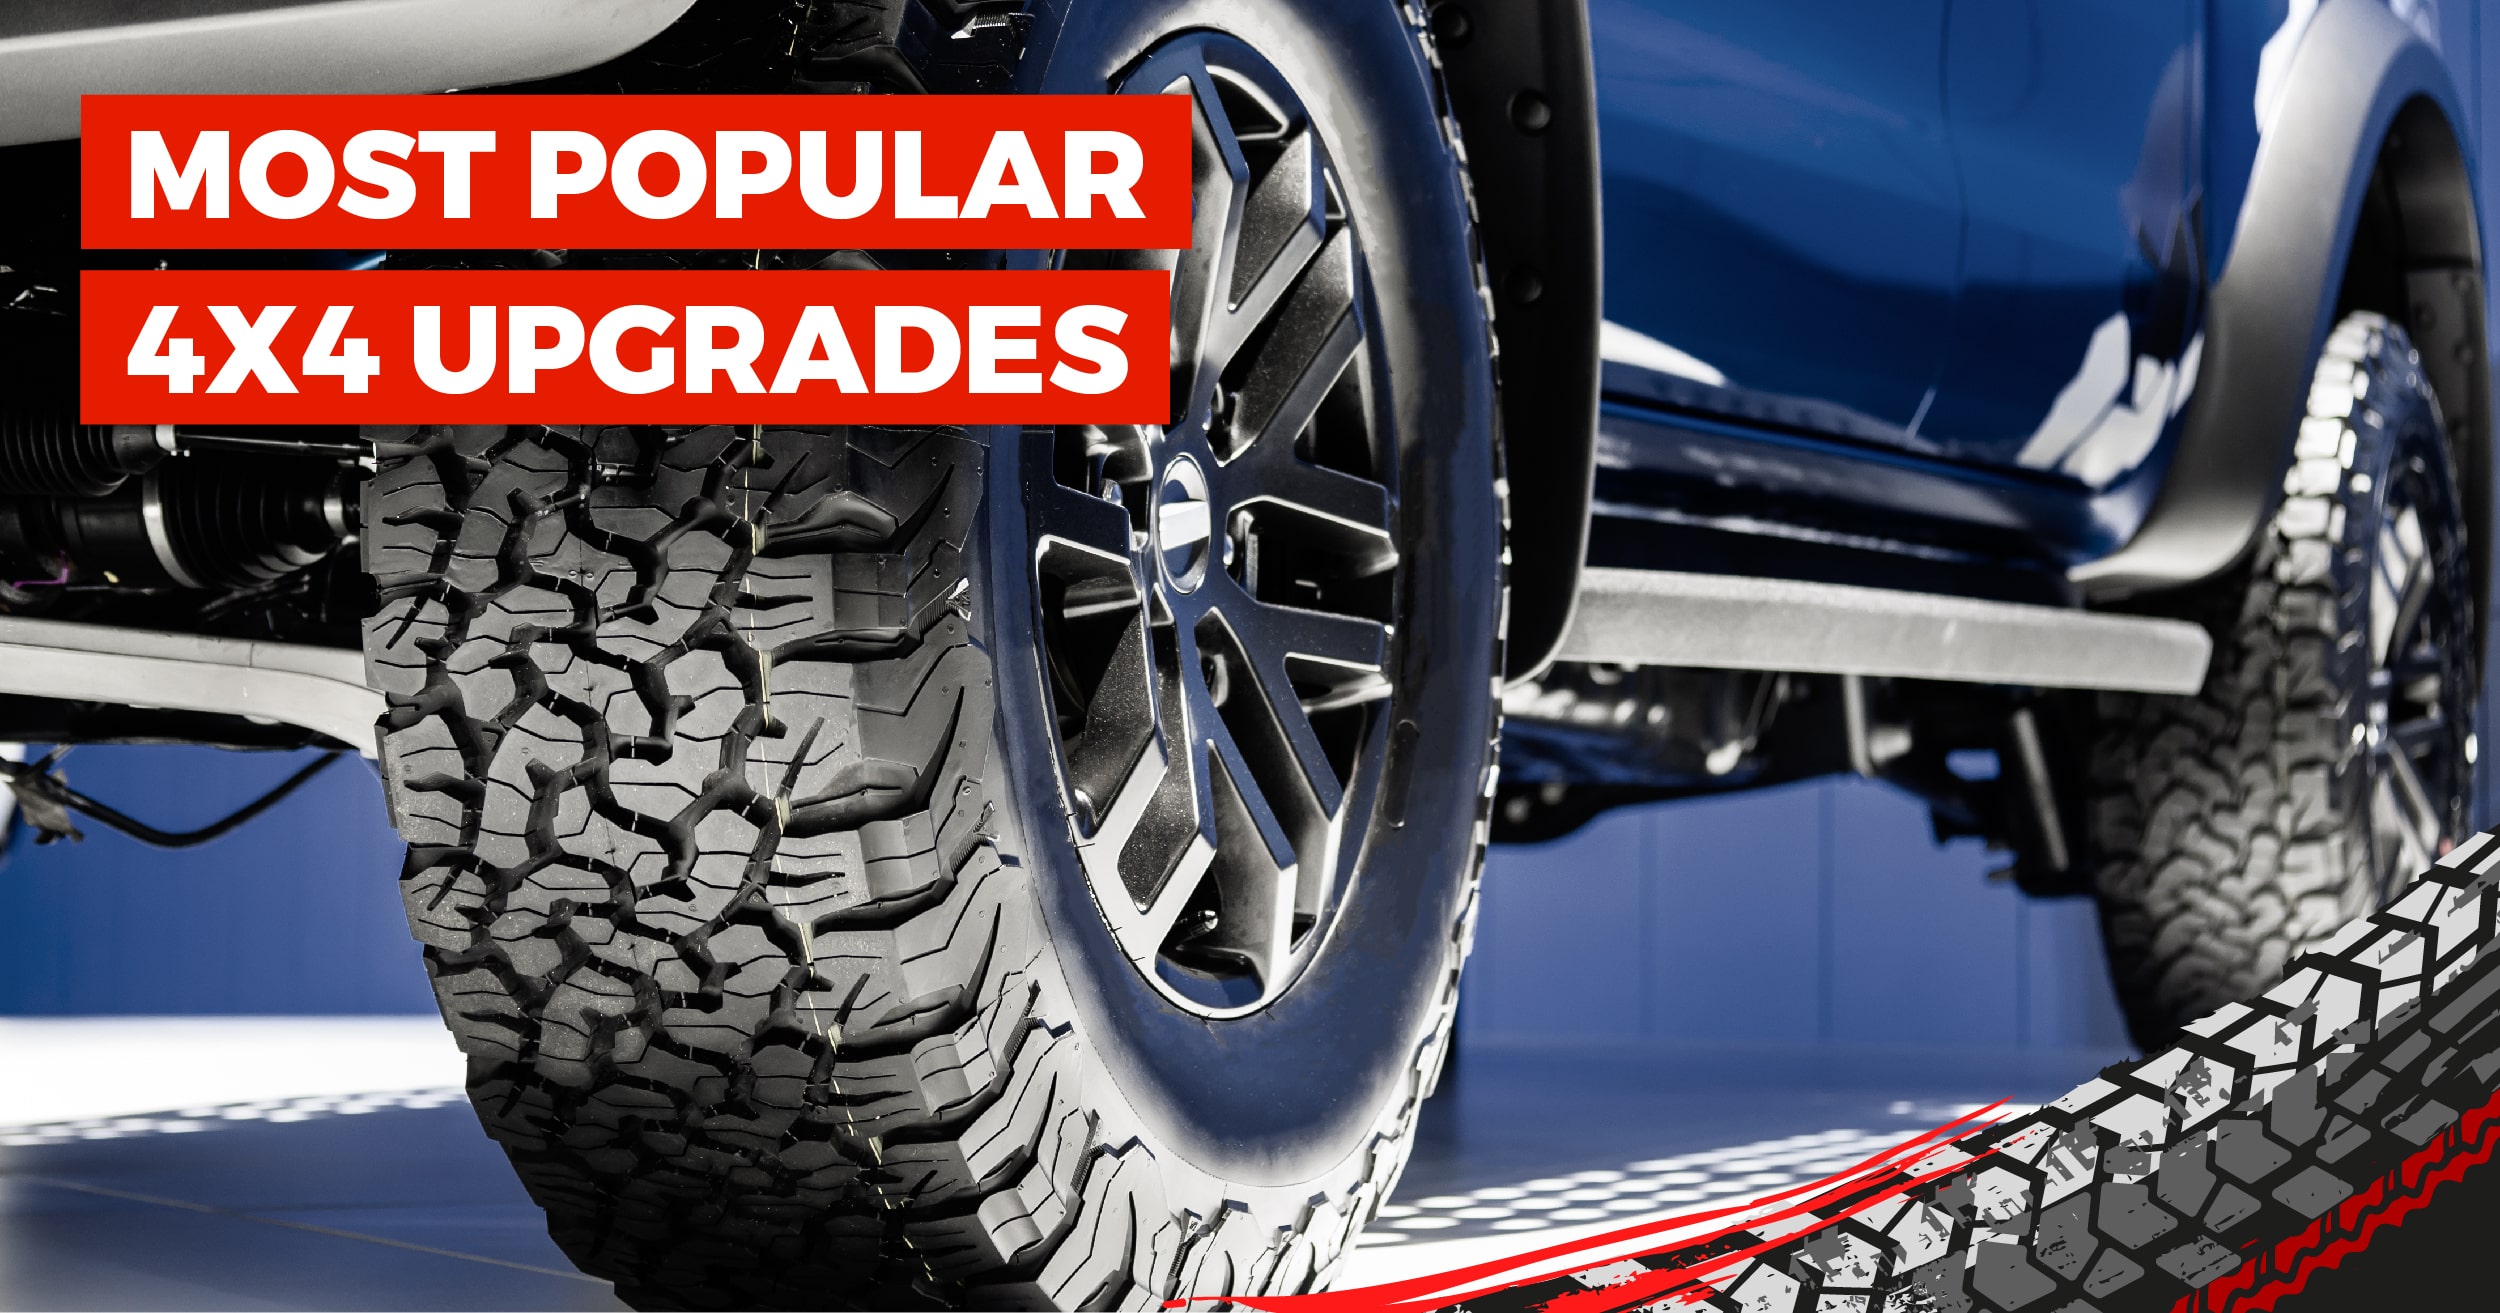 The Most Popular 4x4 Upgrades (And How To Get Them)